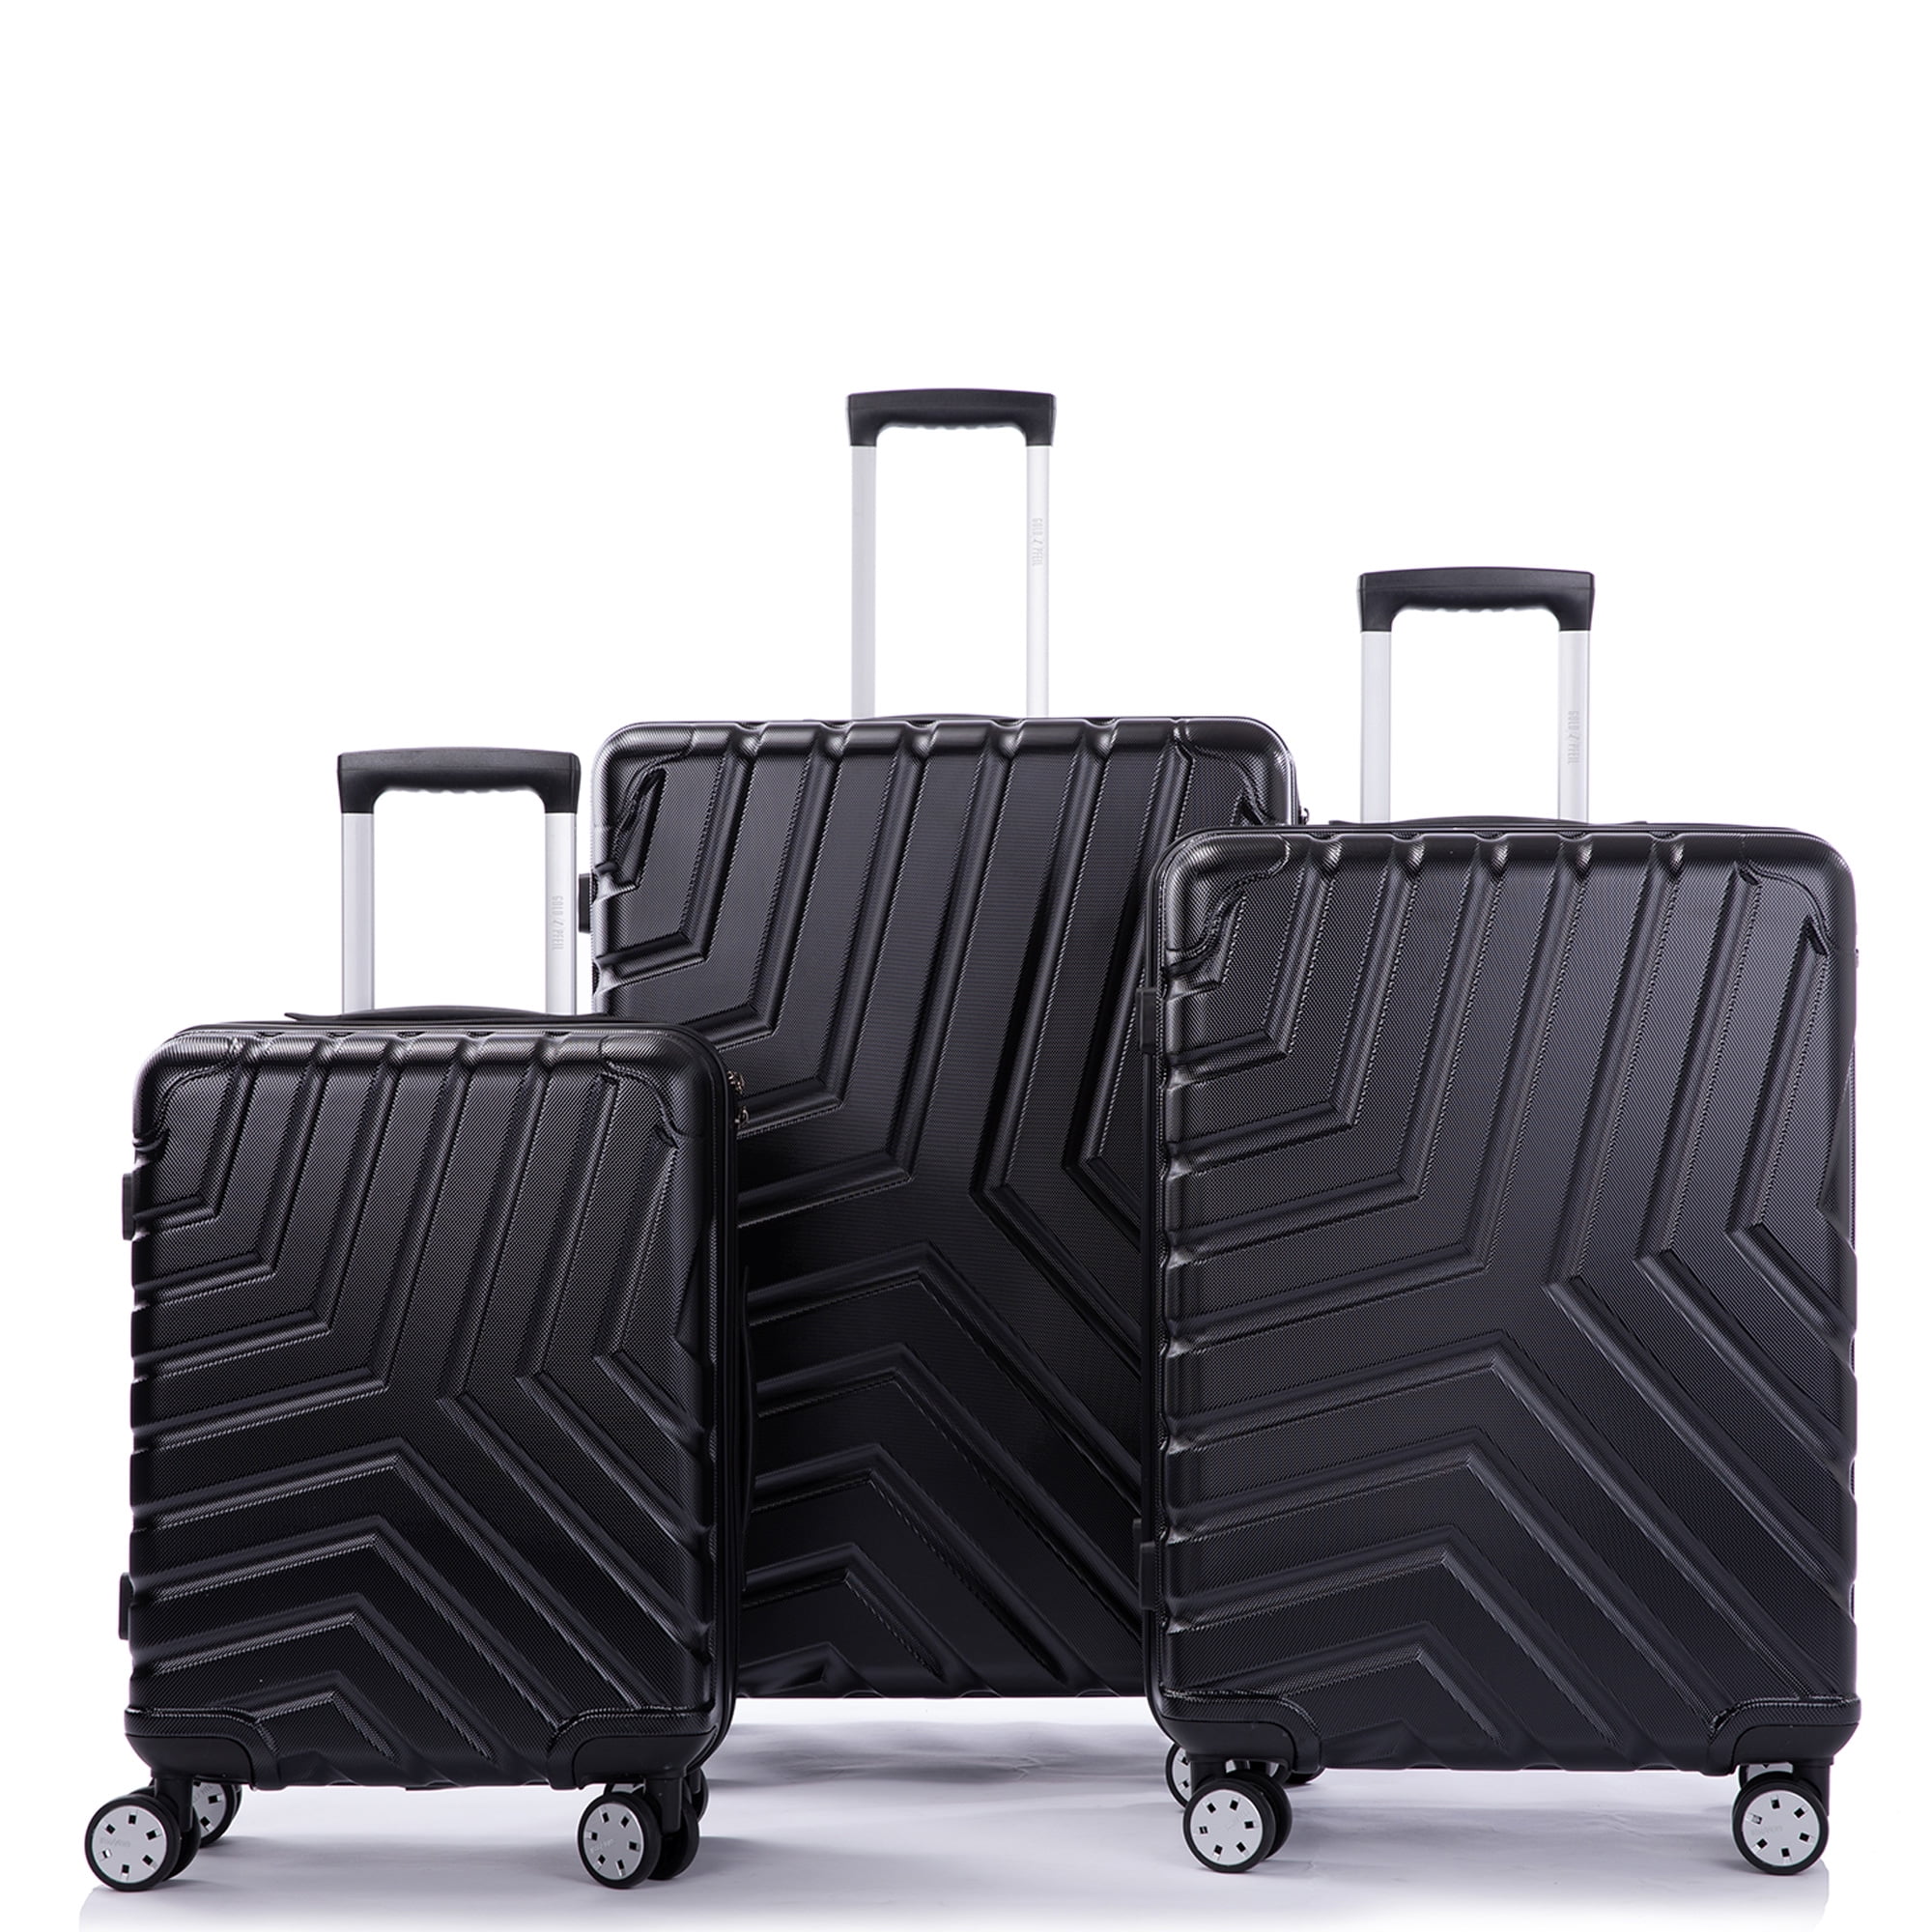 Male and Female Lightweight ABS Portable Consignment Suitcase Trolley Case Lock 4 Wheels CLOUD Luggage Sets Travel Suitcase Color : Red, Size : 20 inches 